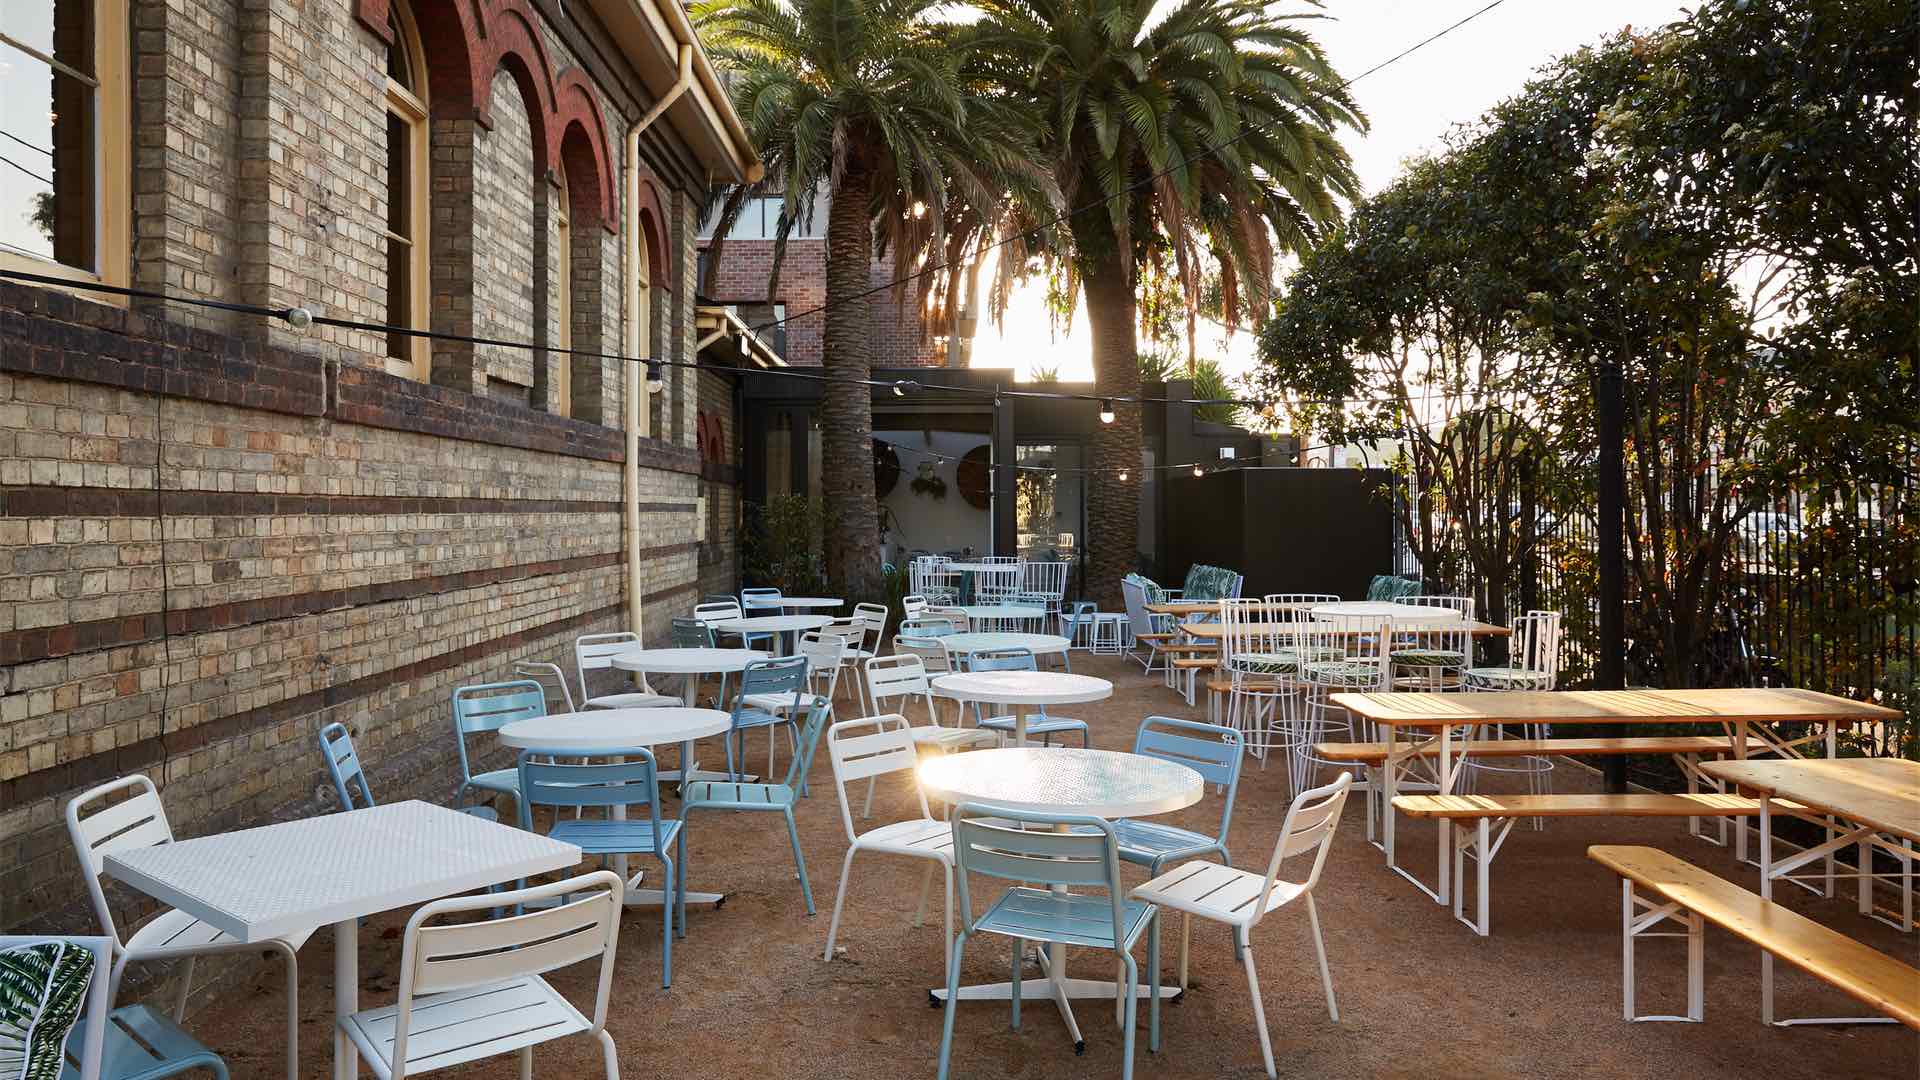 Port Melbourne Italian Fine Diner Ciao Cielo Has Reopened in a Historic Courthouse